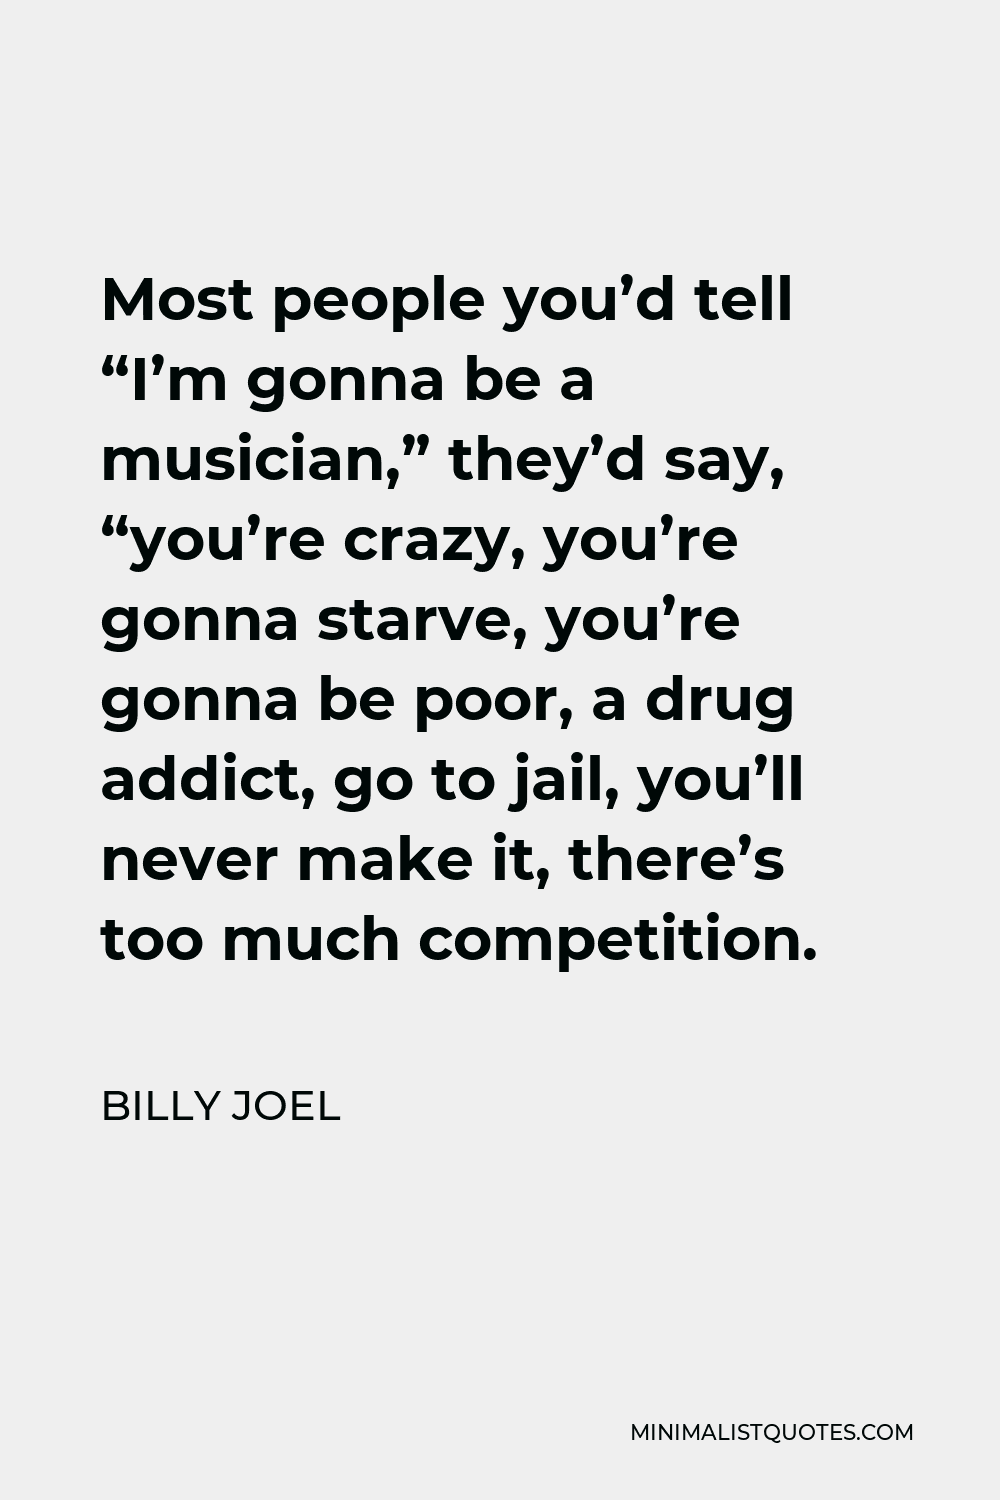 Billy Joel Quote - Most people you’d tell “I’m gonna be a musician,” they’d say, “you’re crazy, you’re gonna starve, you’re gonna be poor, a drug addict, go to jail, you’ll never make it, there’s too much competition.